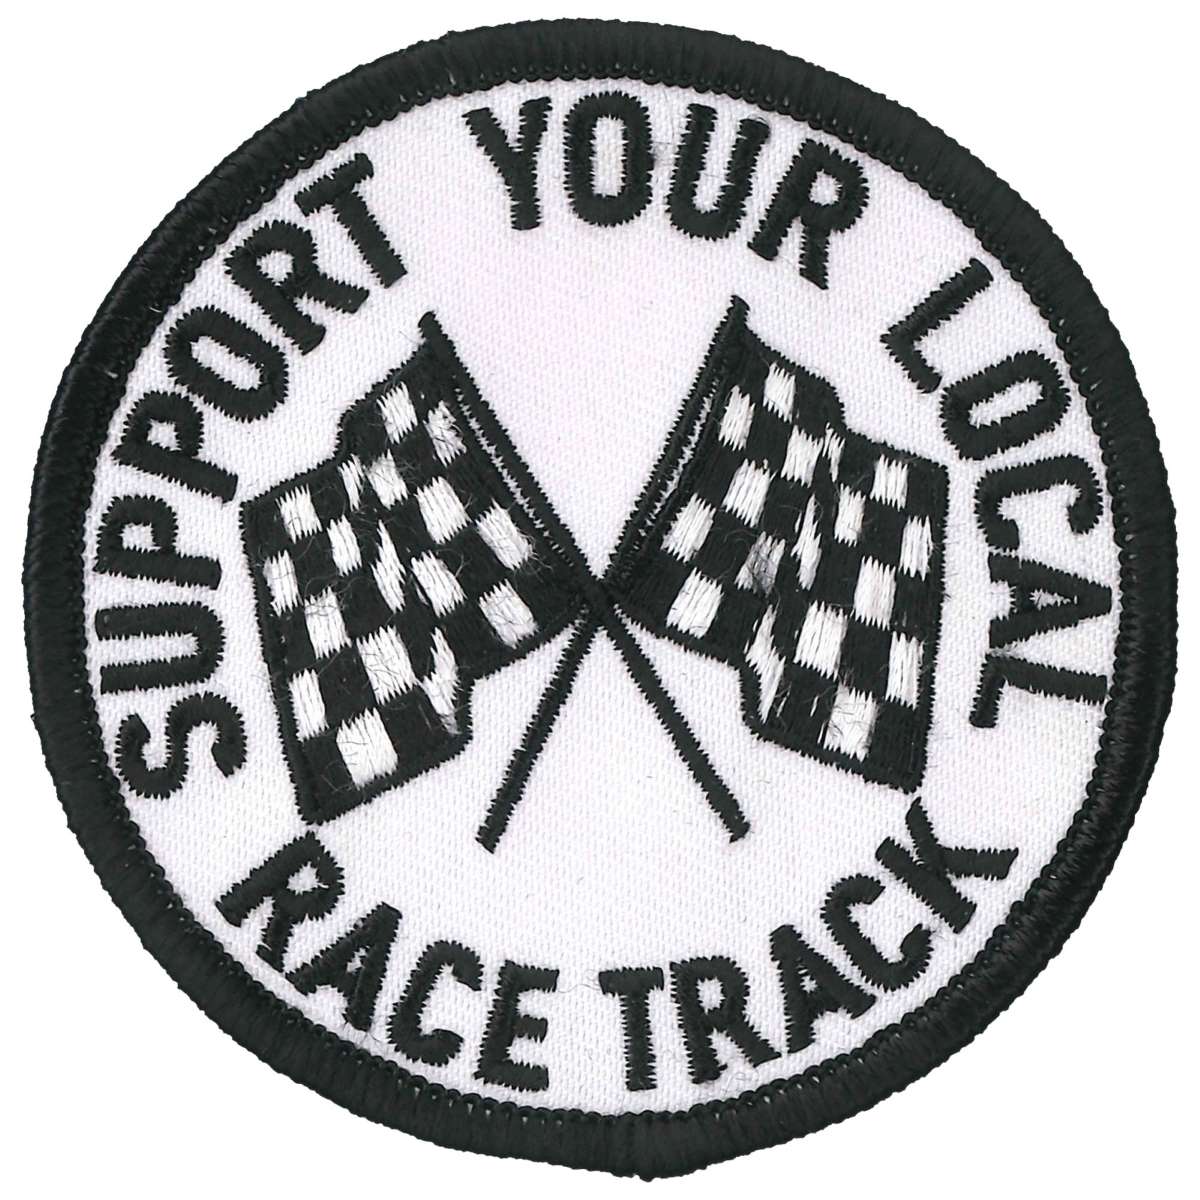 Hot Leathers Support Your Local Racetrack 3" Patch PPL9871